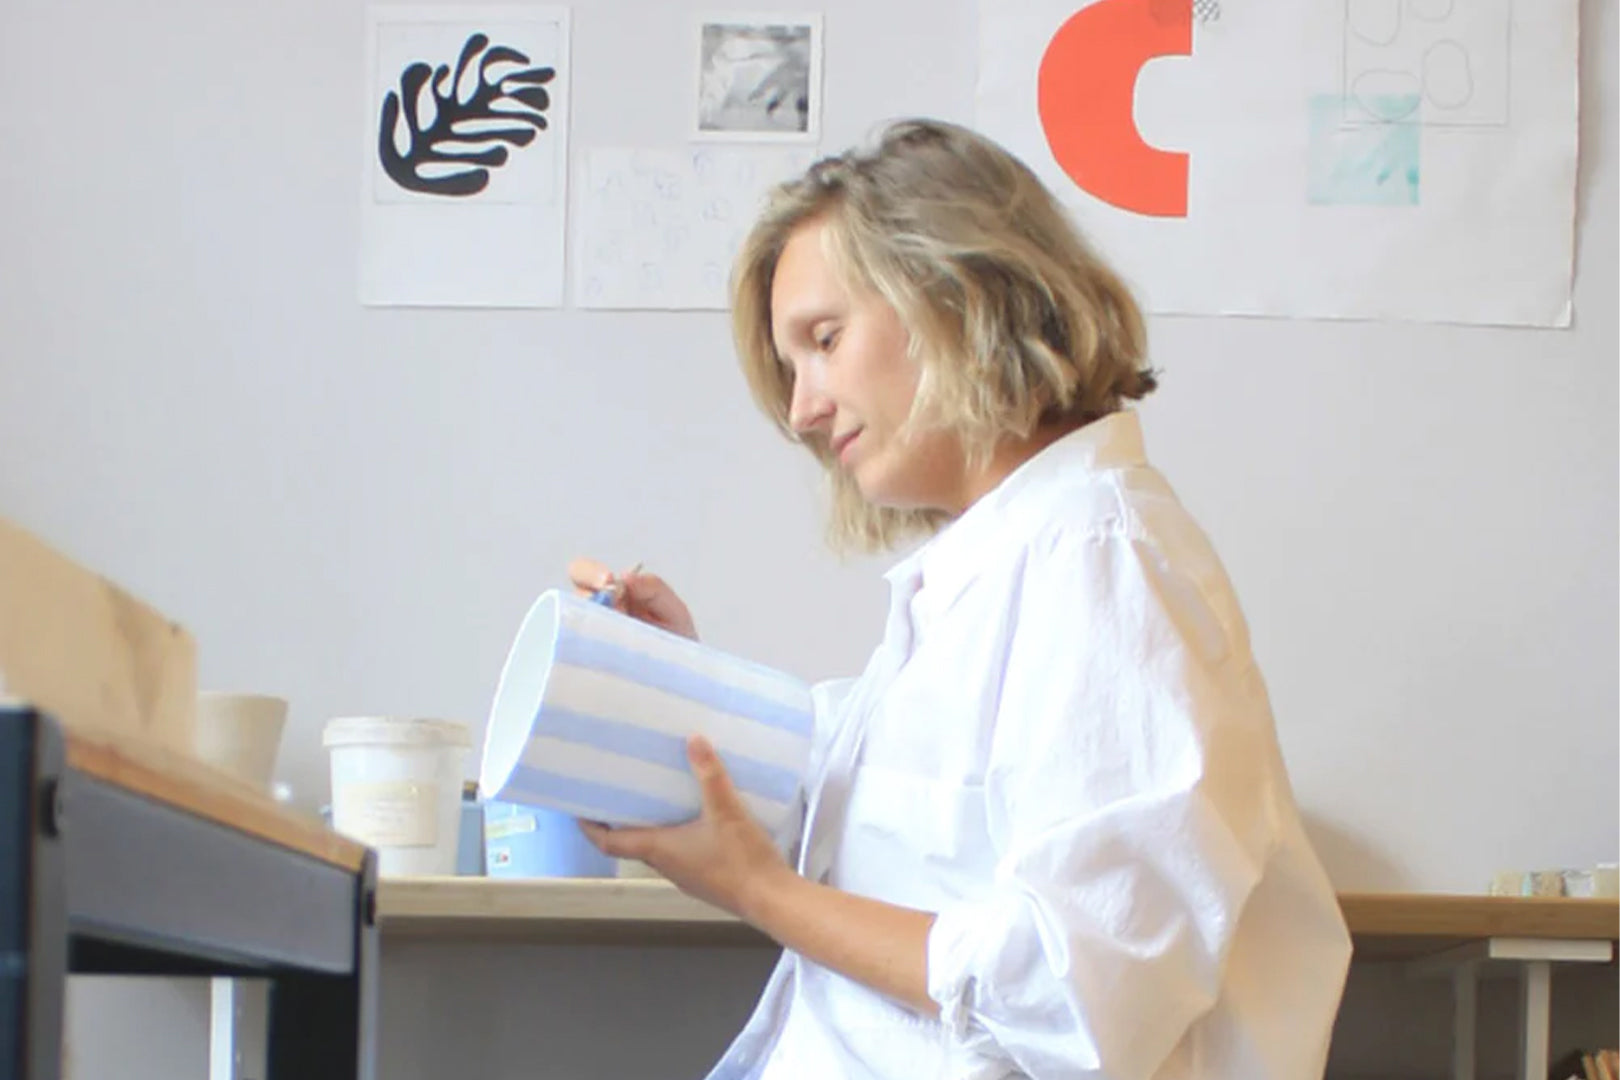 A creative female artist: Andrea Frieling, working on her ceramic in a sunlit studio.